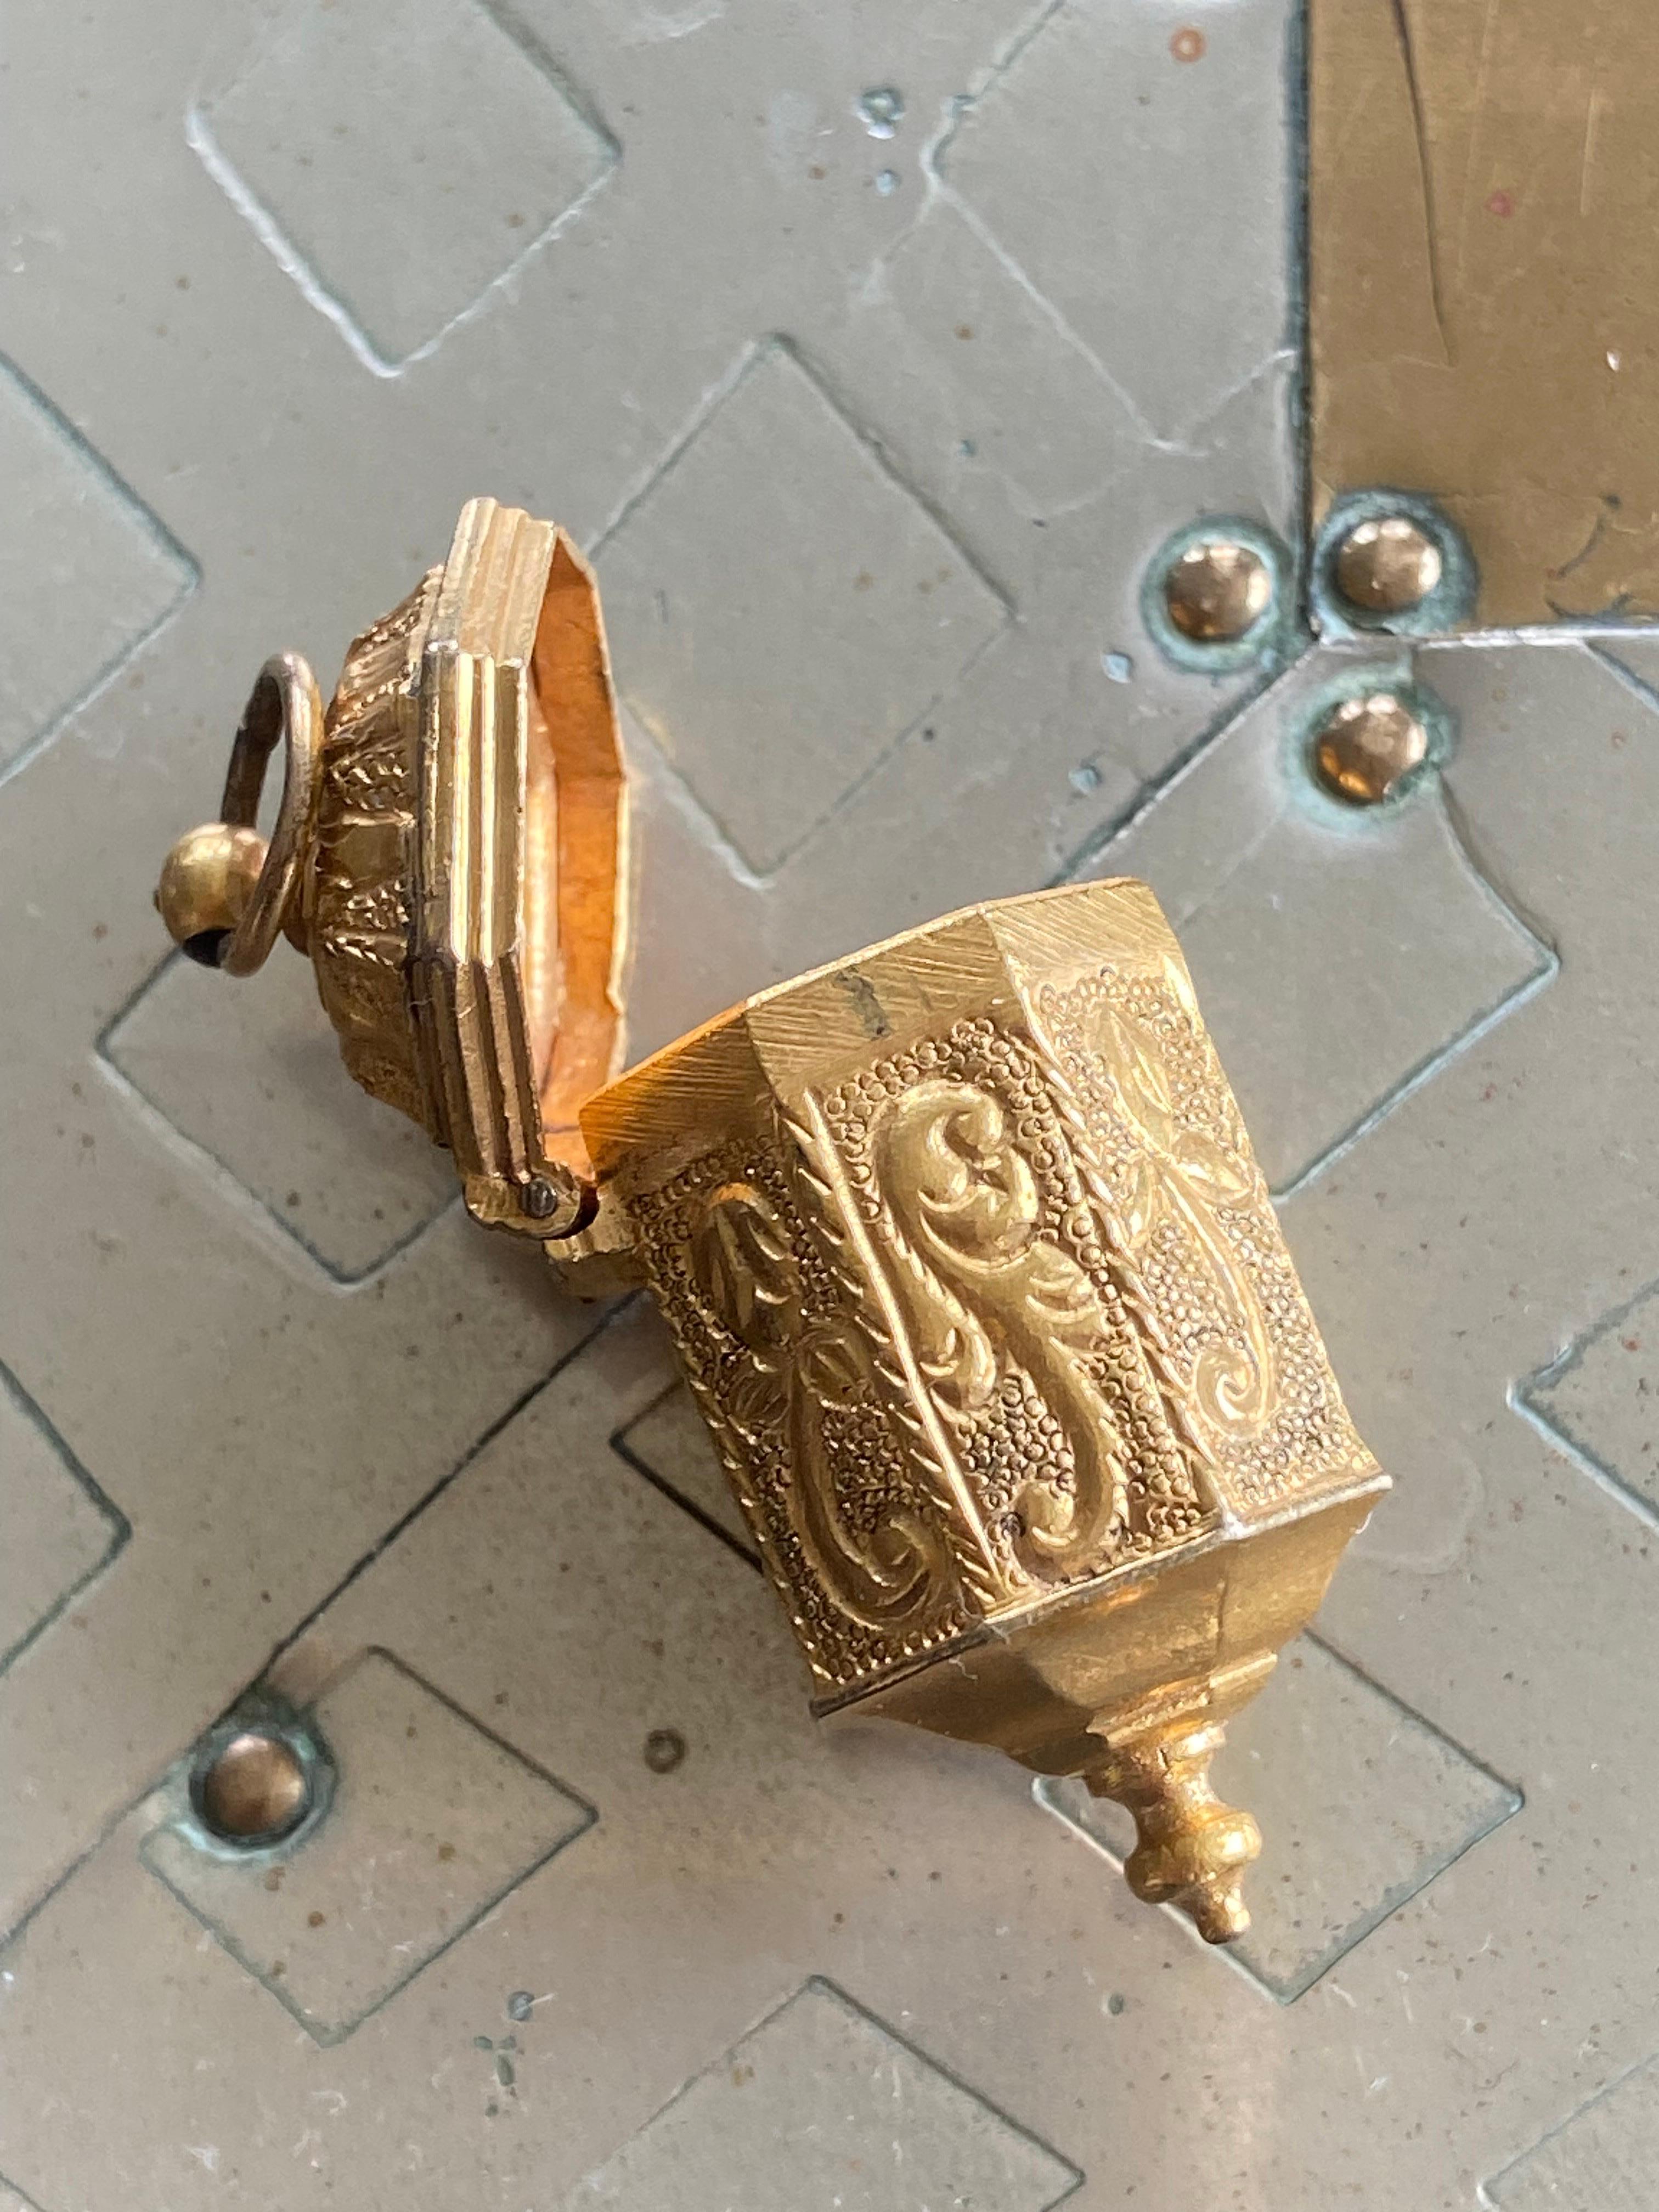 18th century Small golden box in octagonal shape, which is engraved in fine details and all the sides have different images! It is a lovely locket where you may keep your tiny treasure! Very unusual item which could grab attention! Original